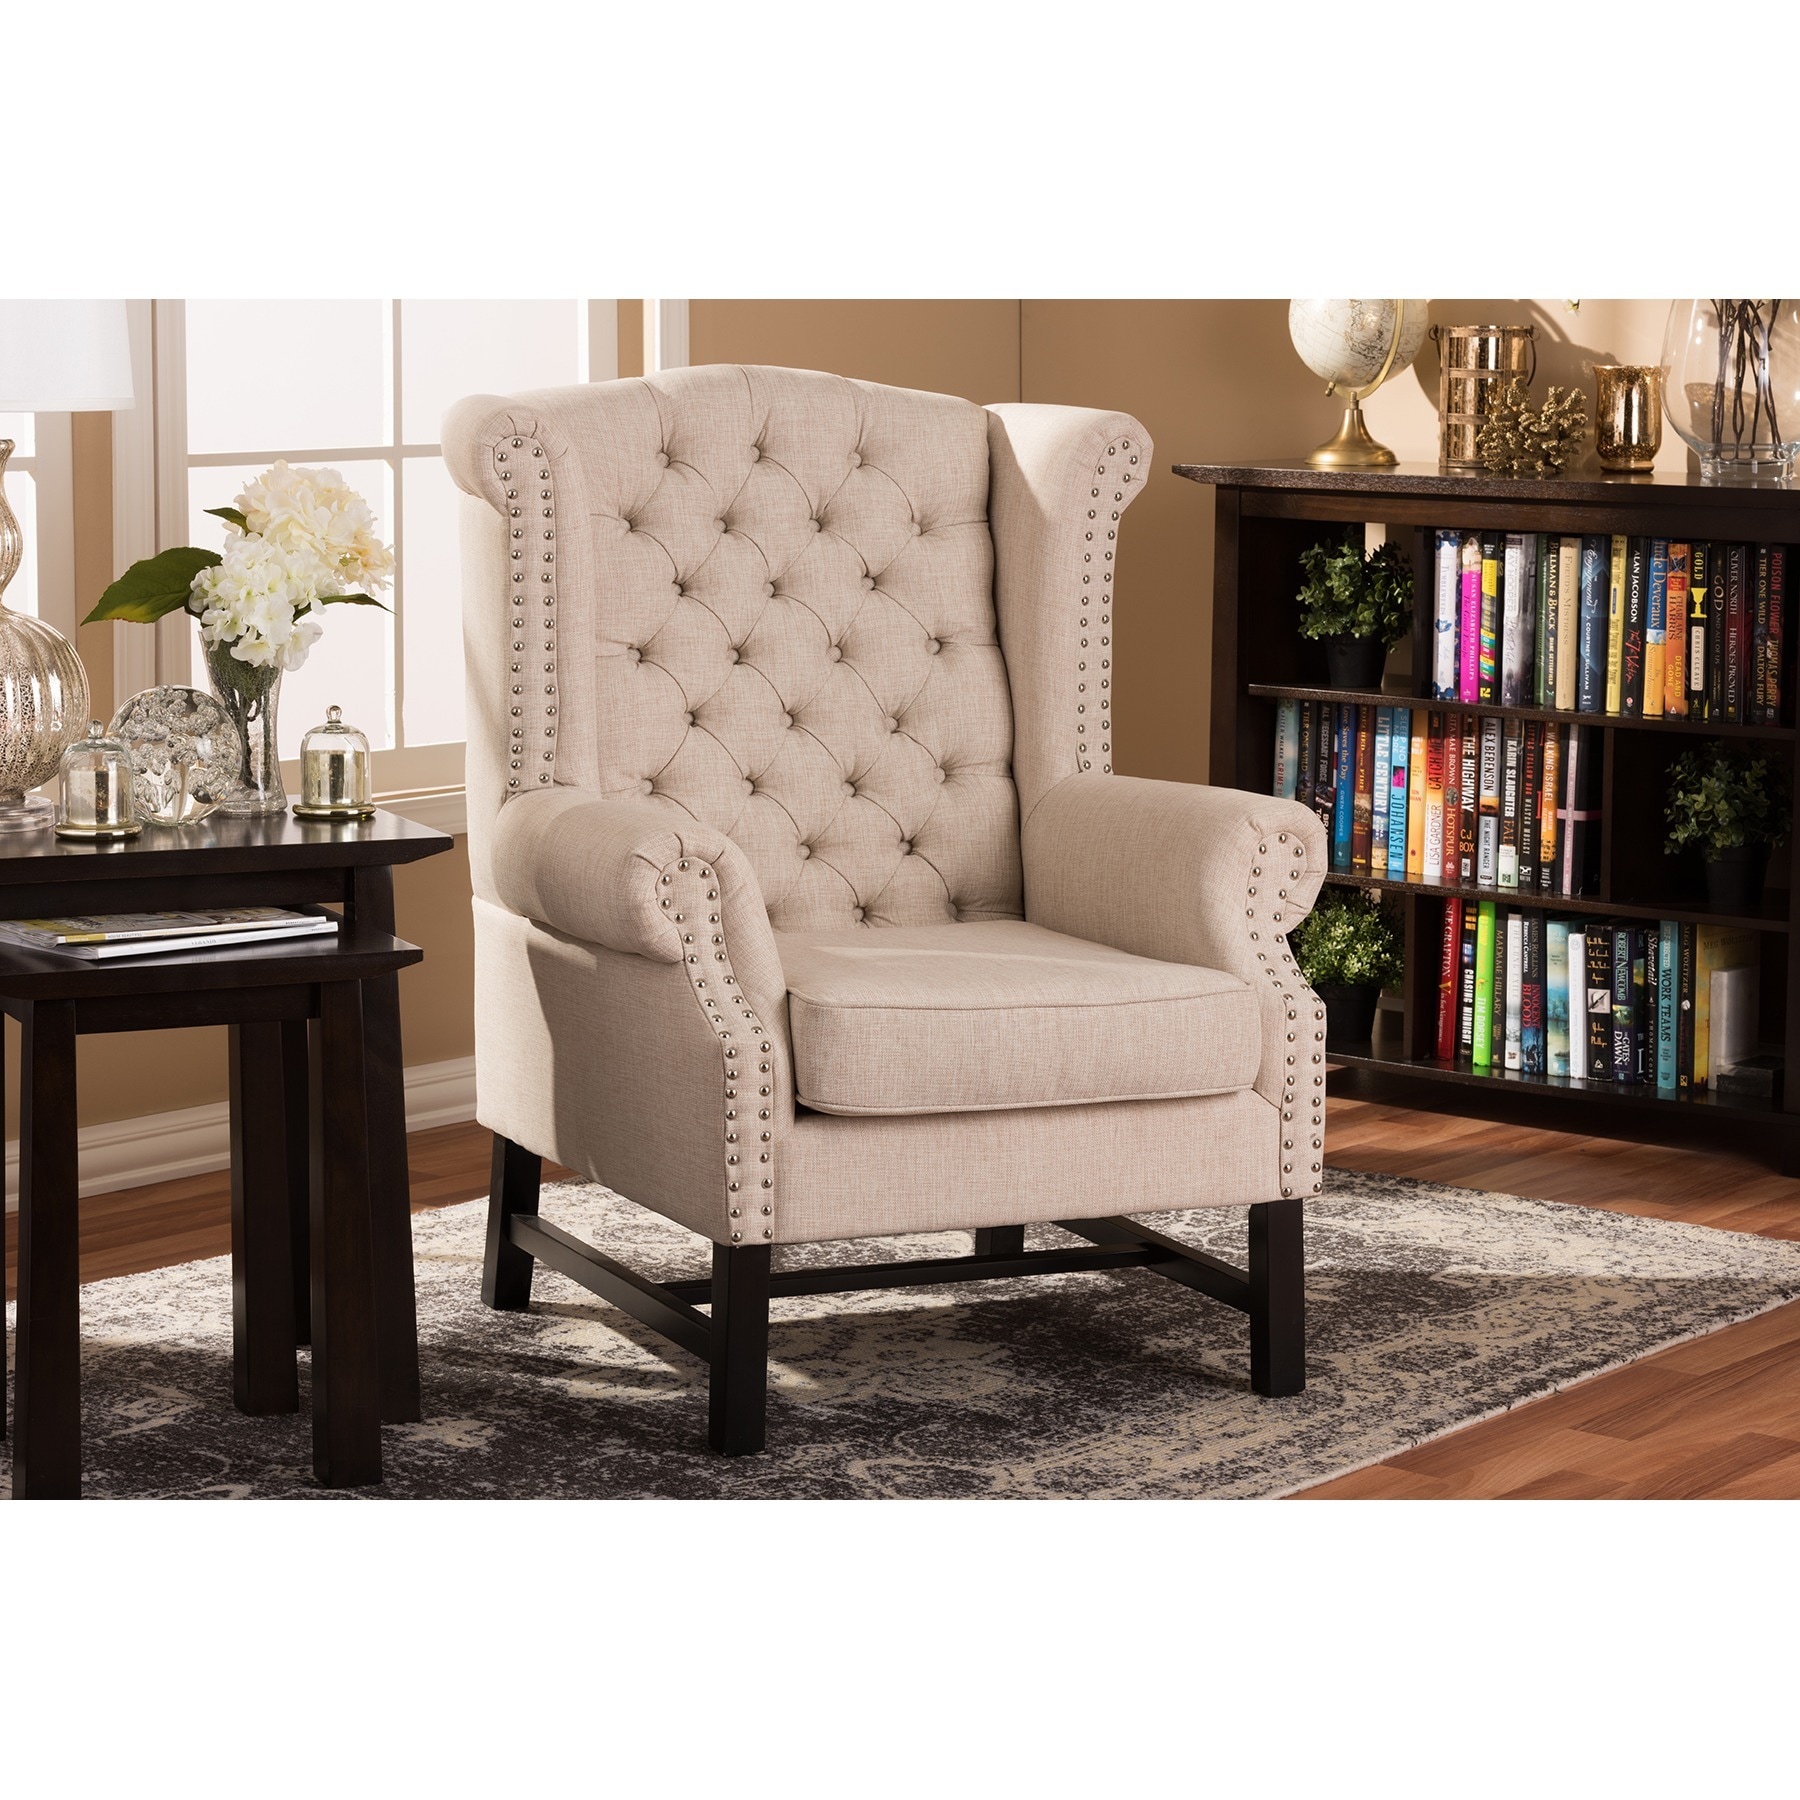 Beige Living Room Chairs Buy Arm Chairs, Accent